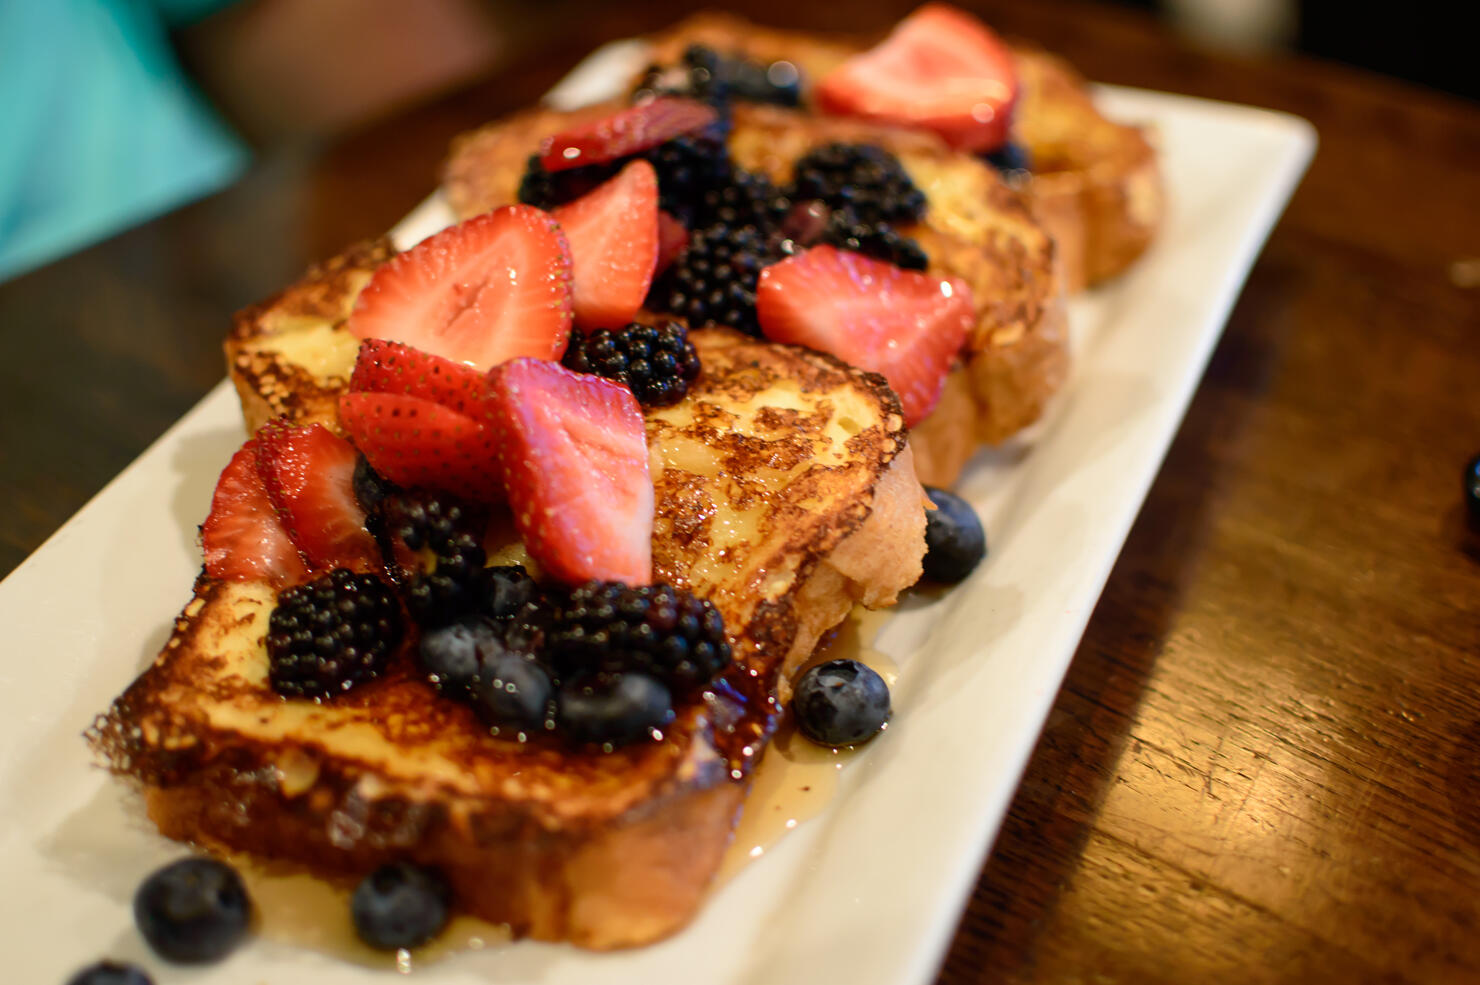 French toast with sliced berries strawberry, blackberry and blueberry